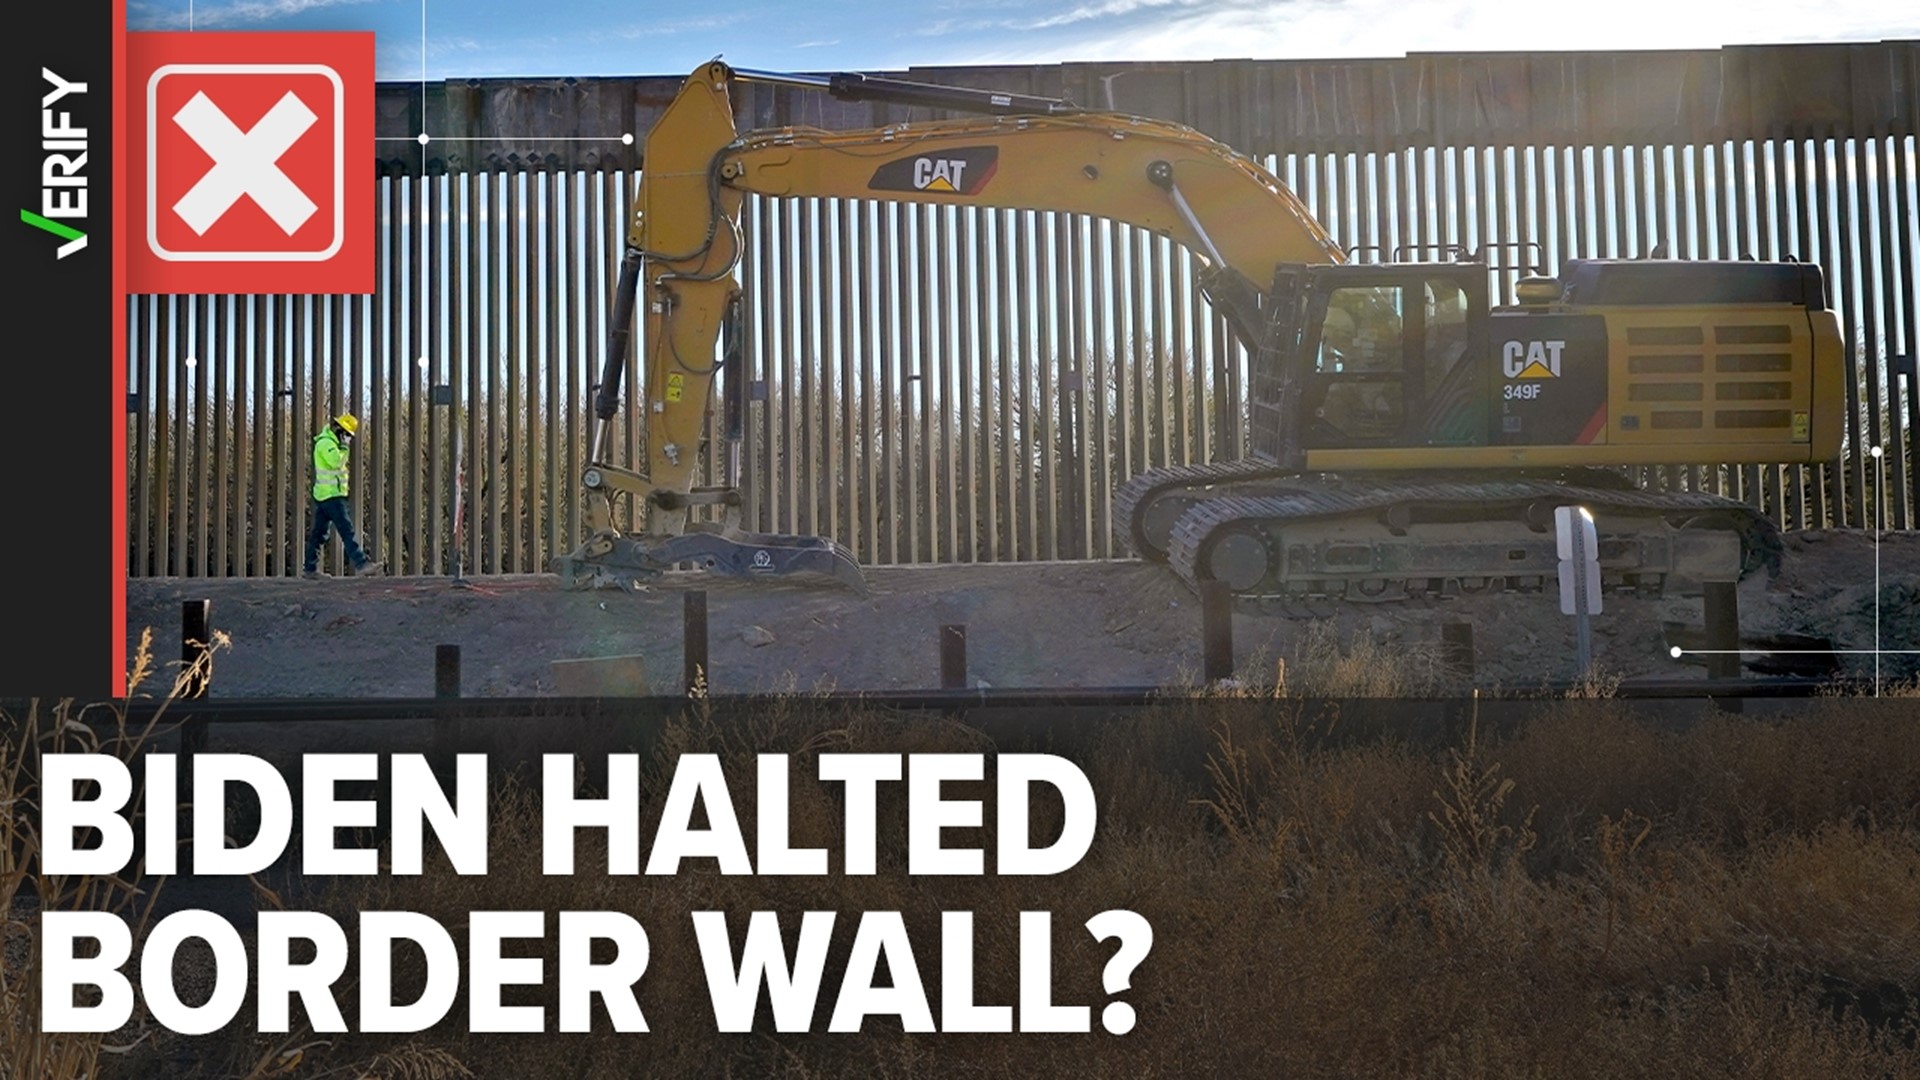 While the Biden administration did initially pause all border barrier construction projects, it has since resumed building border walls.